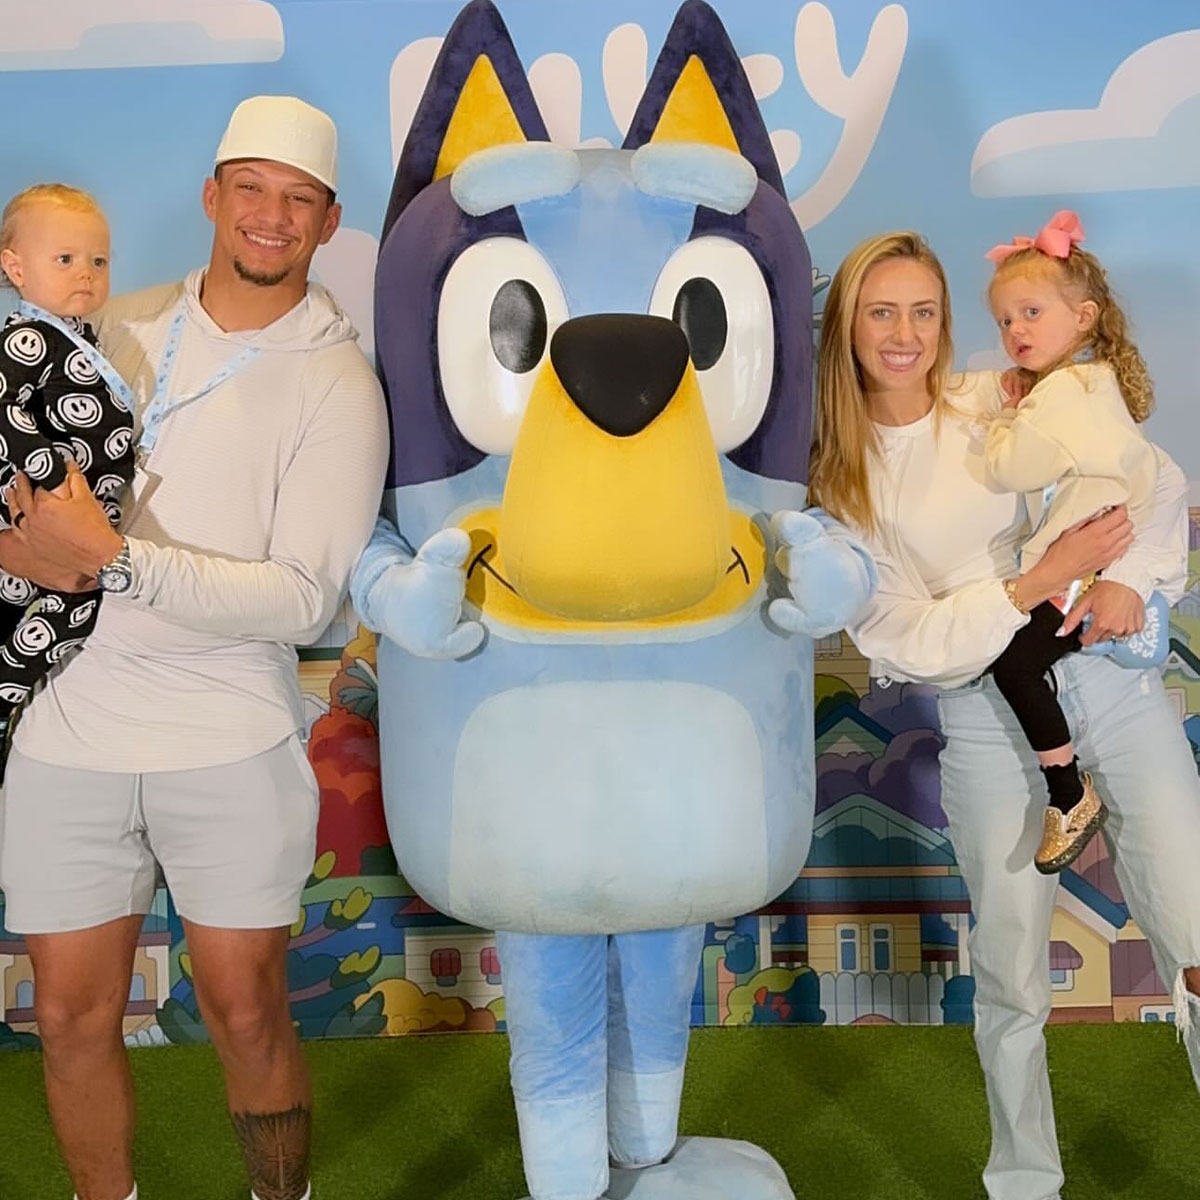 Patrick Mahomes and Brittany Mahomes Bring Their Kids to Meet Bluey in Adorable Photo